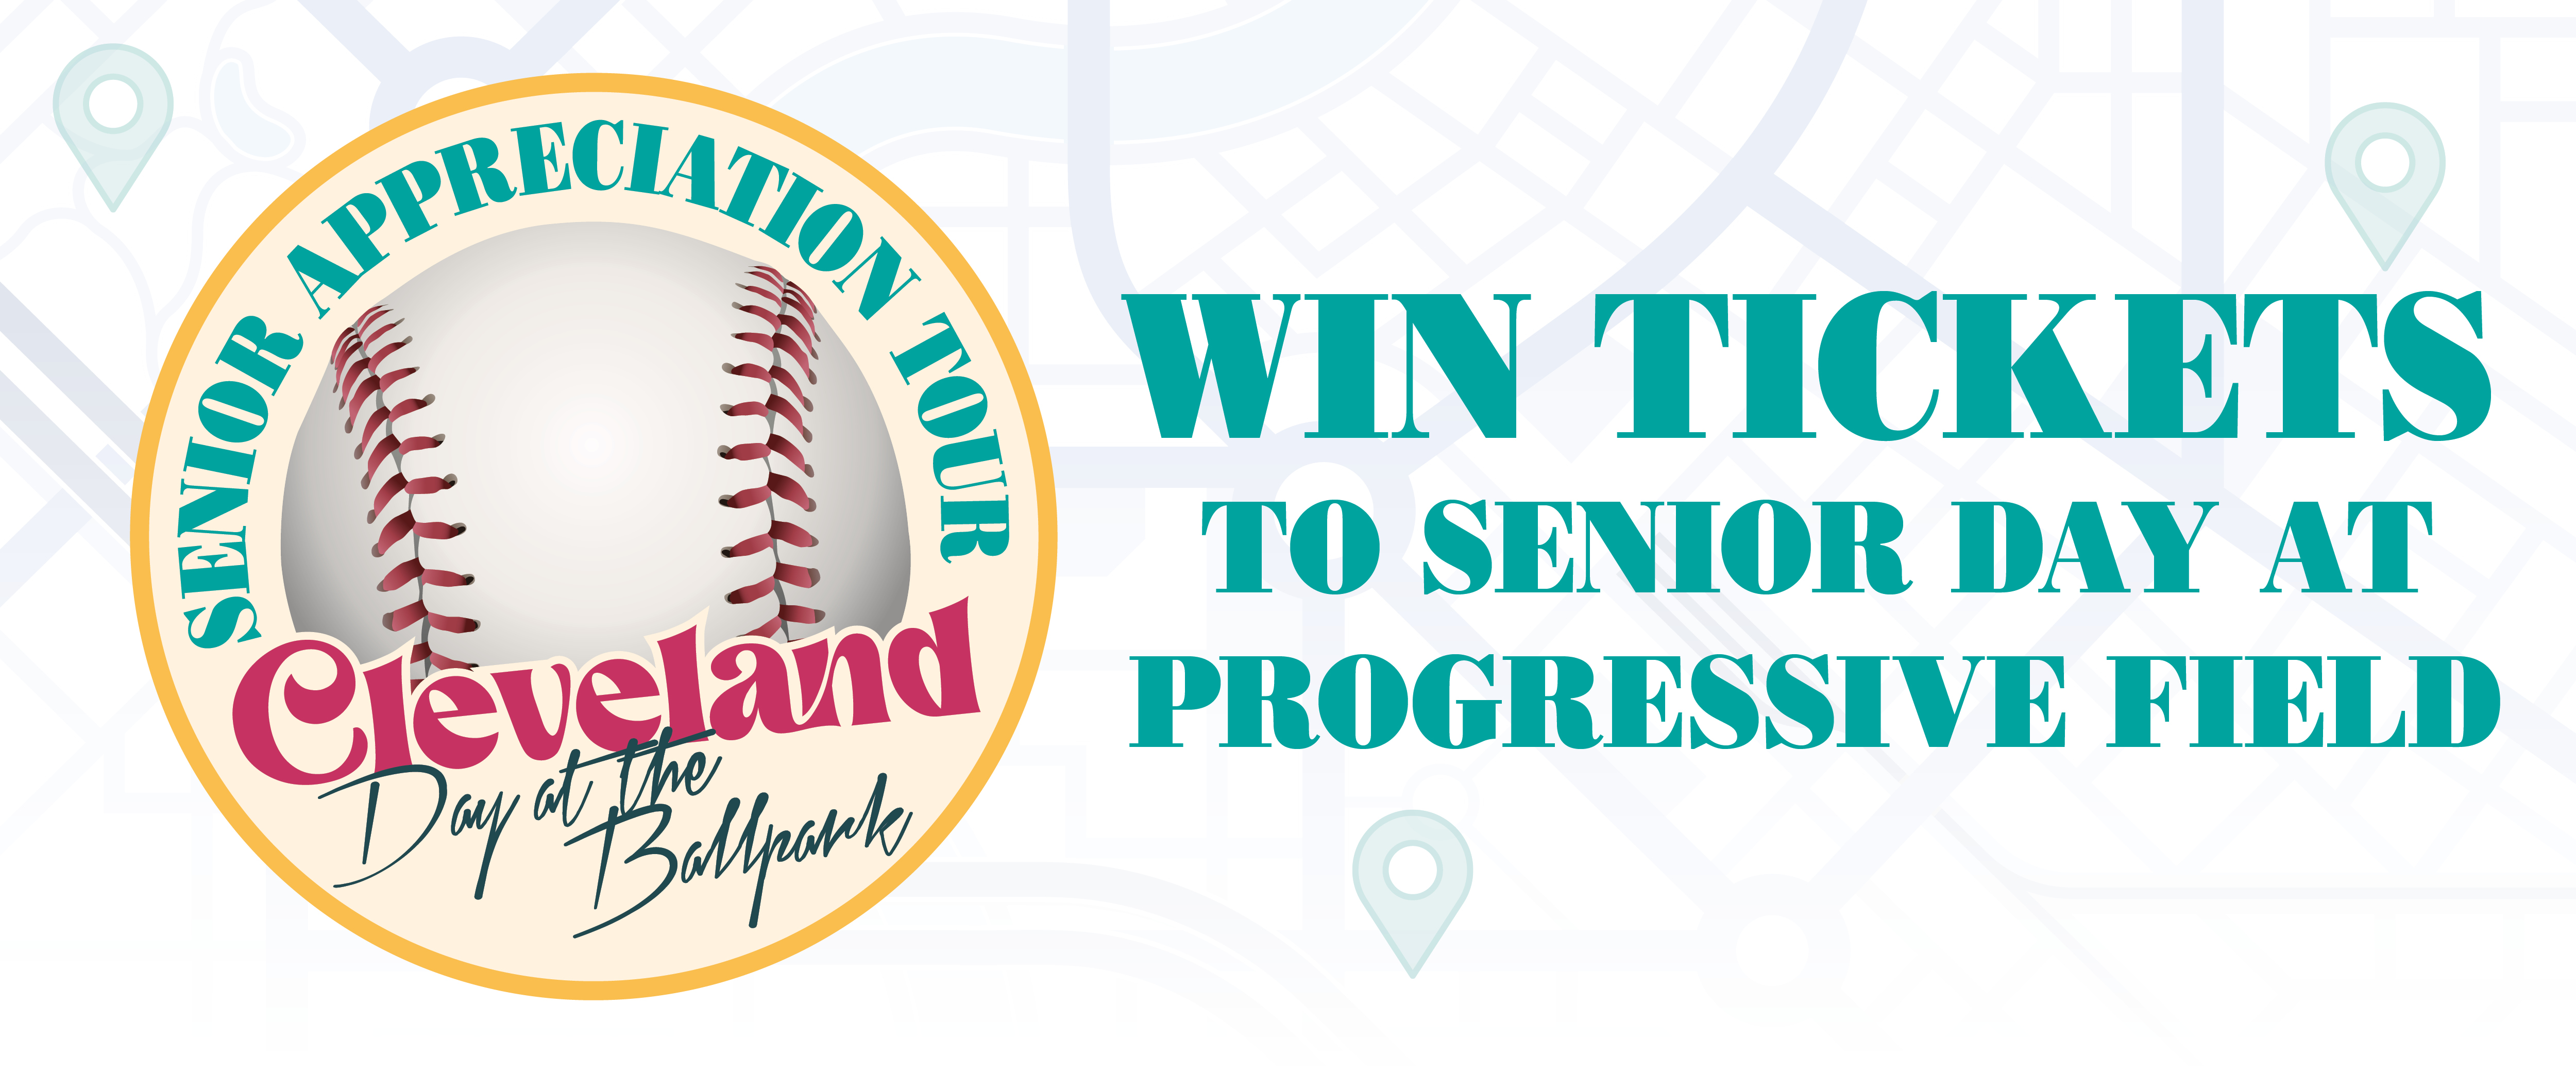 Graphic of a baseball that reads" "win tickets to senior day at progressive field".